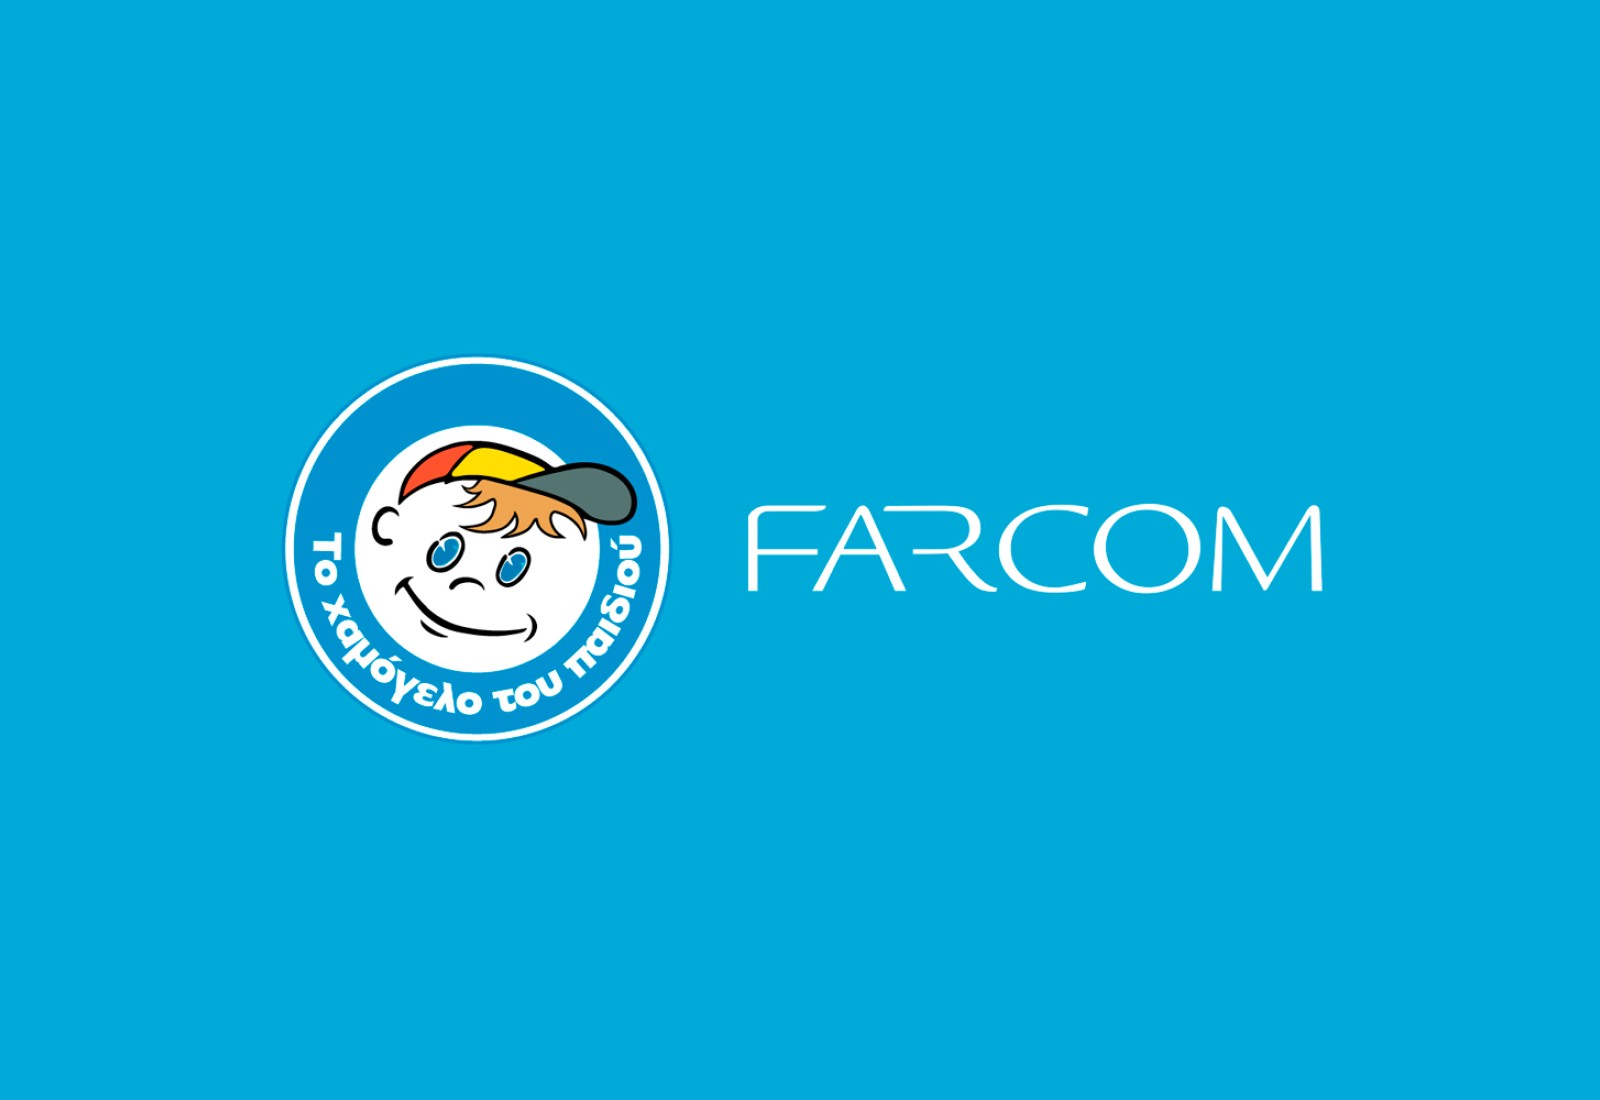 New CSR action by Farcom for “THE SMILE OF THE CHILD”